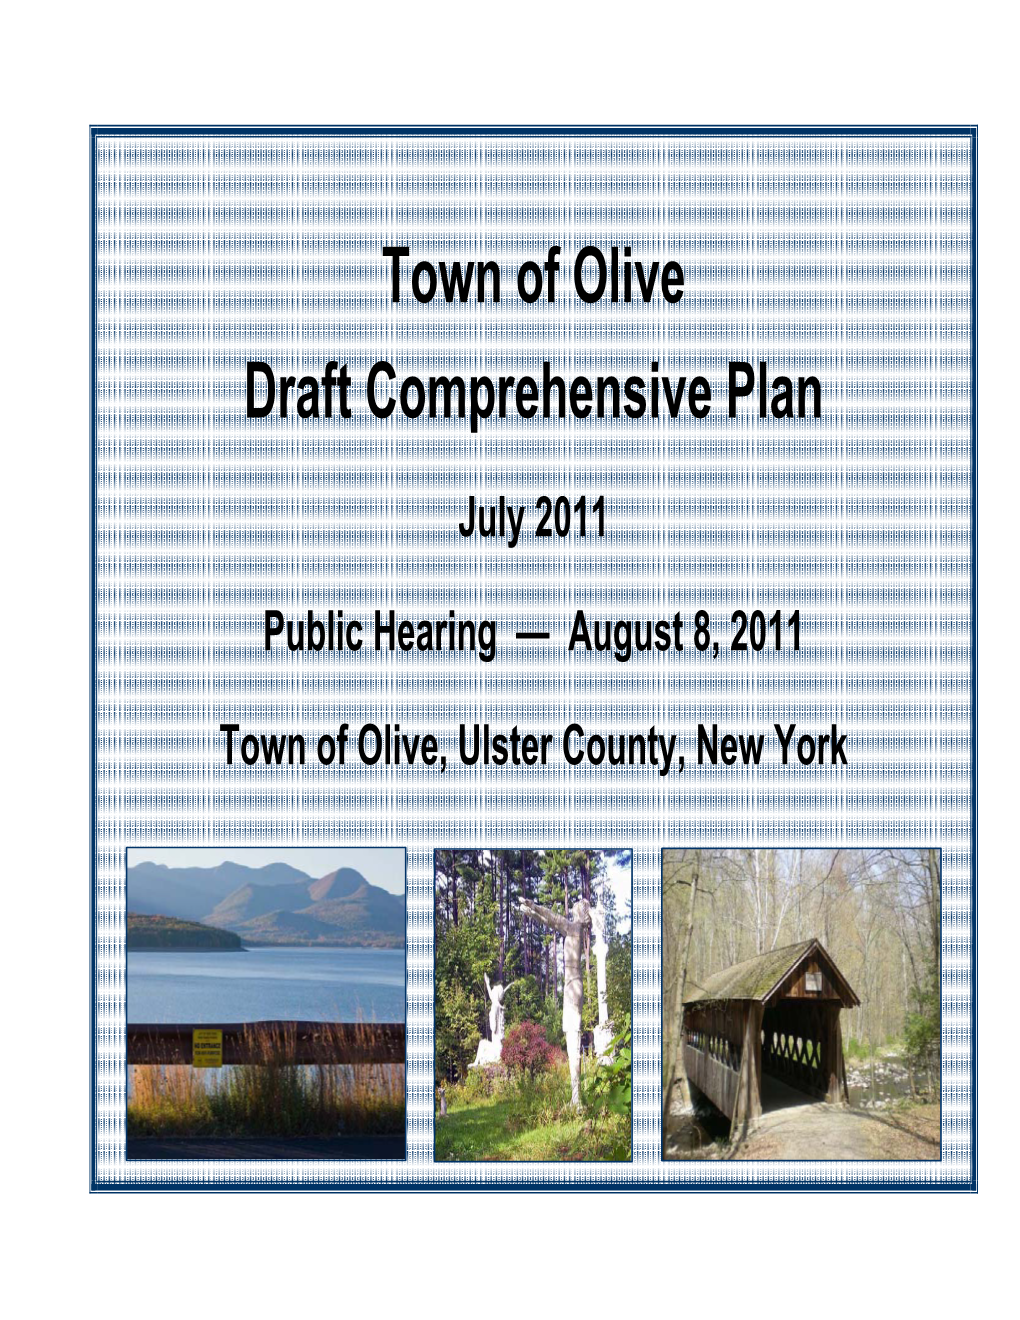 Town of Olive Draft Comprehensive Plan